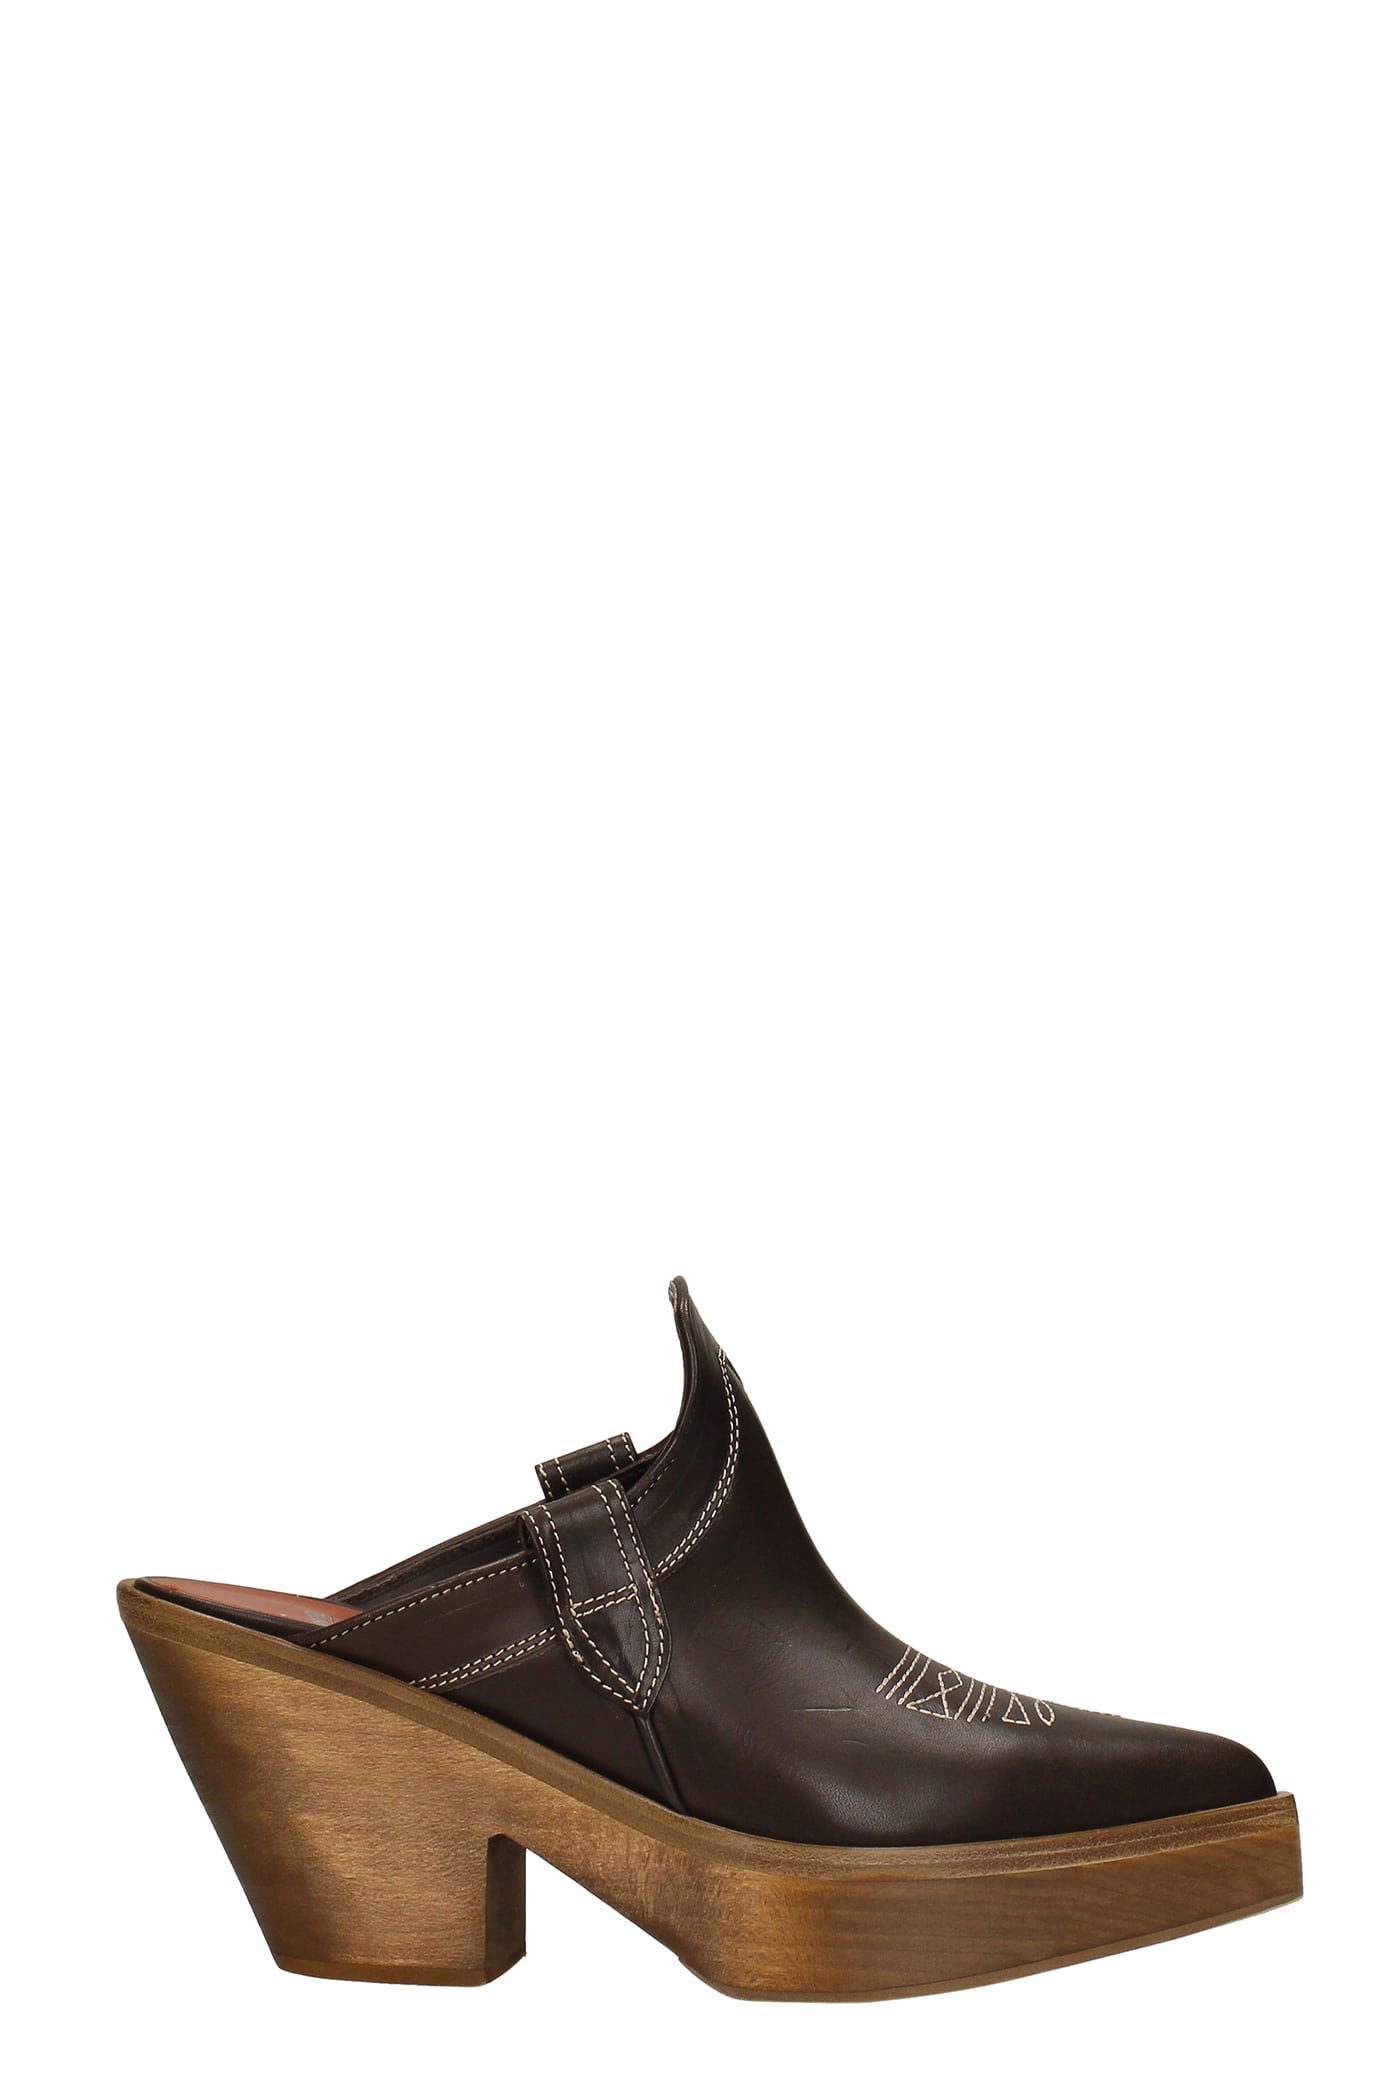 Sonora Belen Low Heels Ankle Boots In Brown Leather